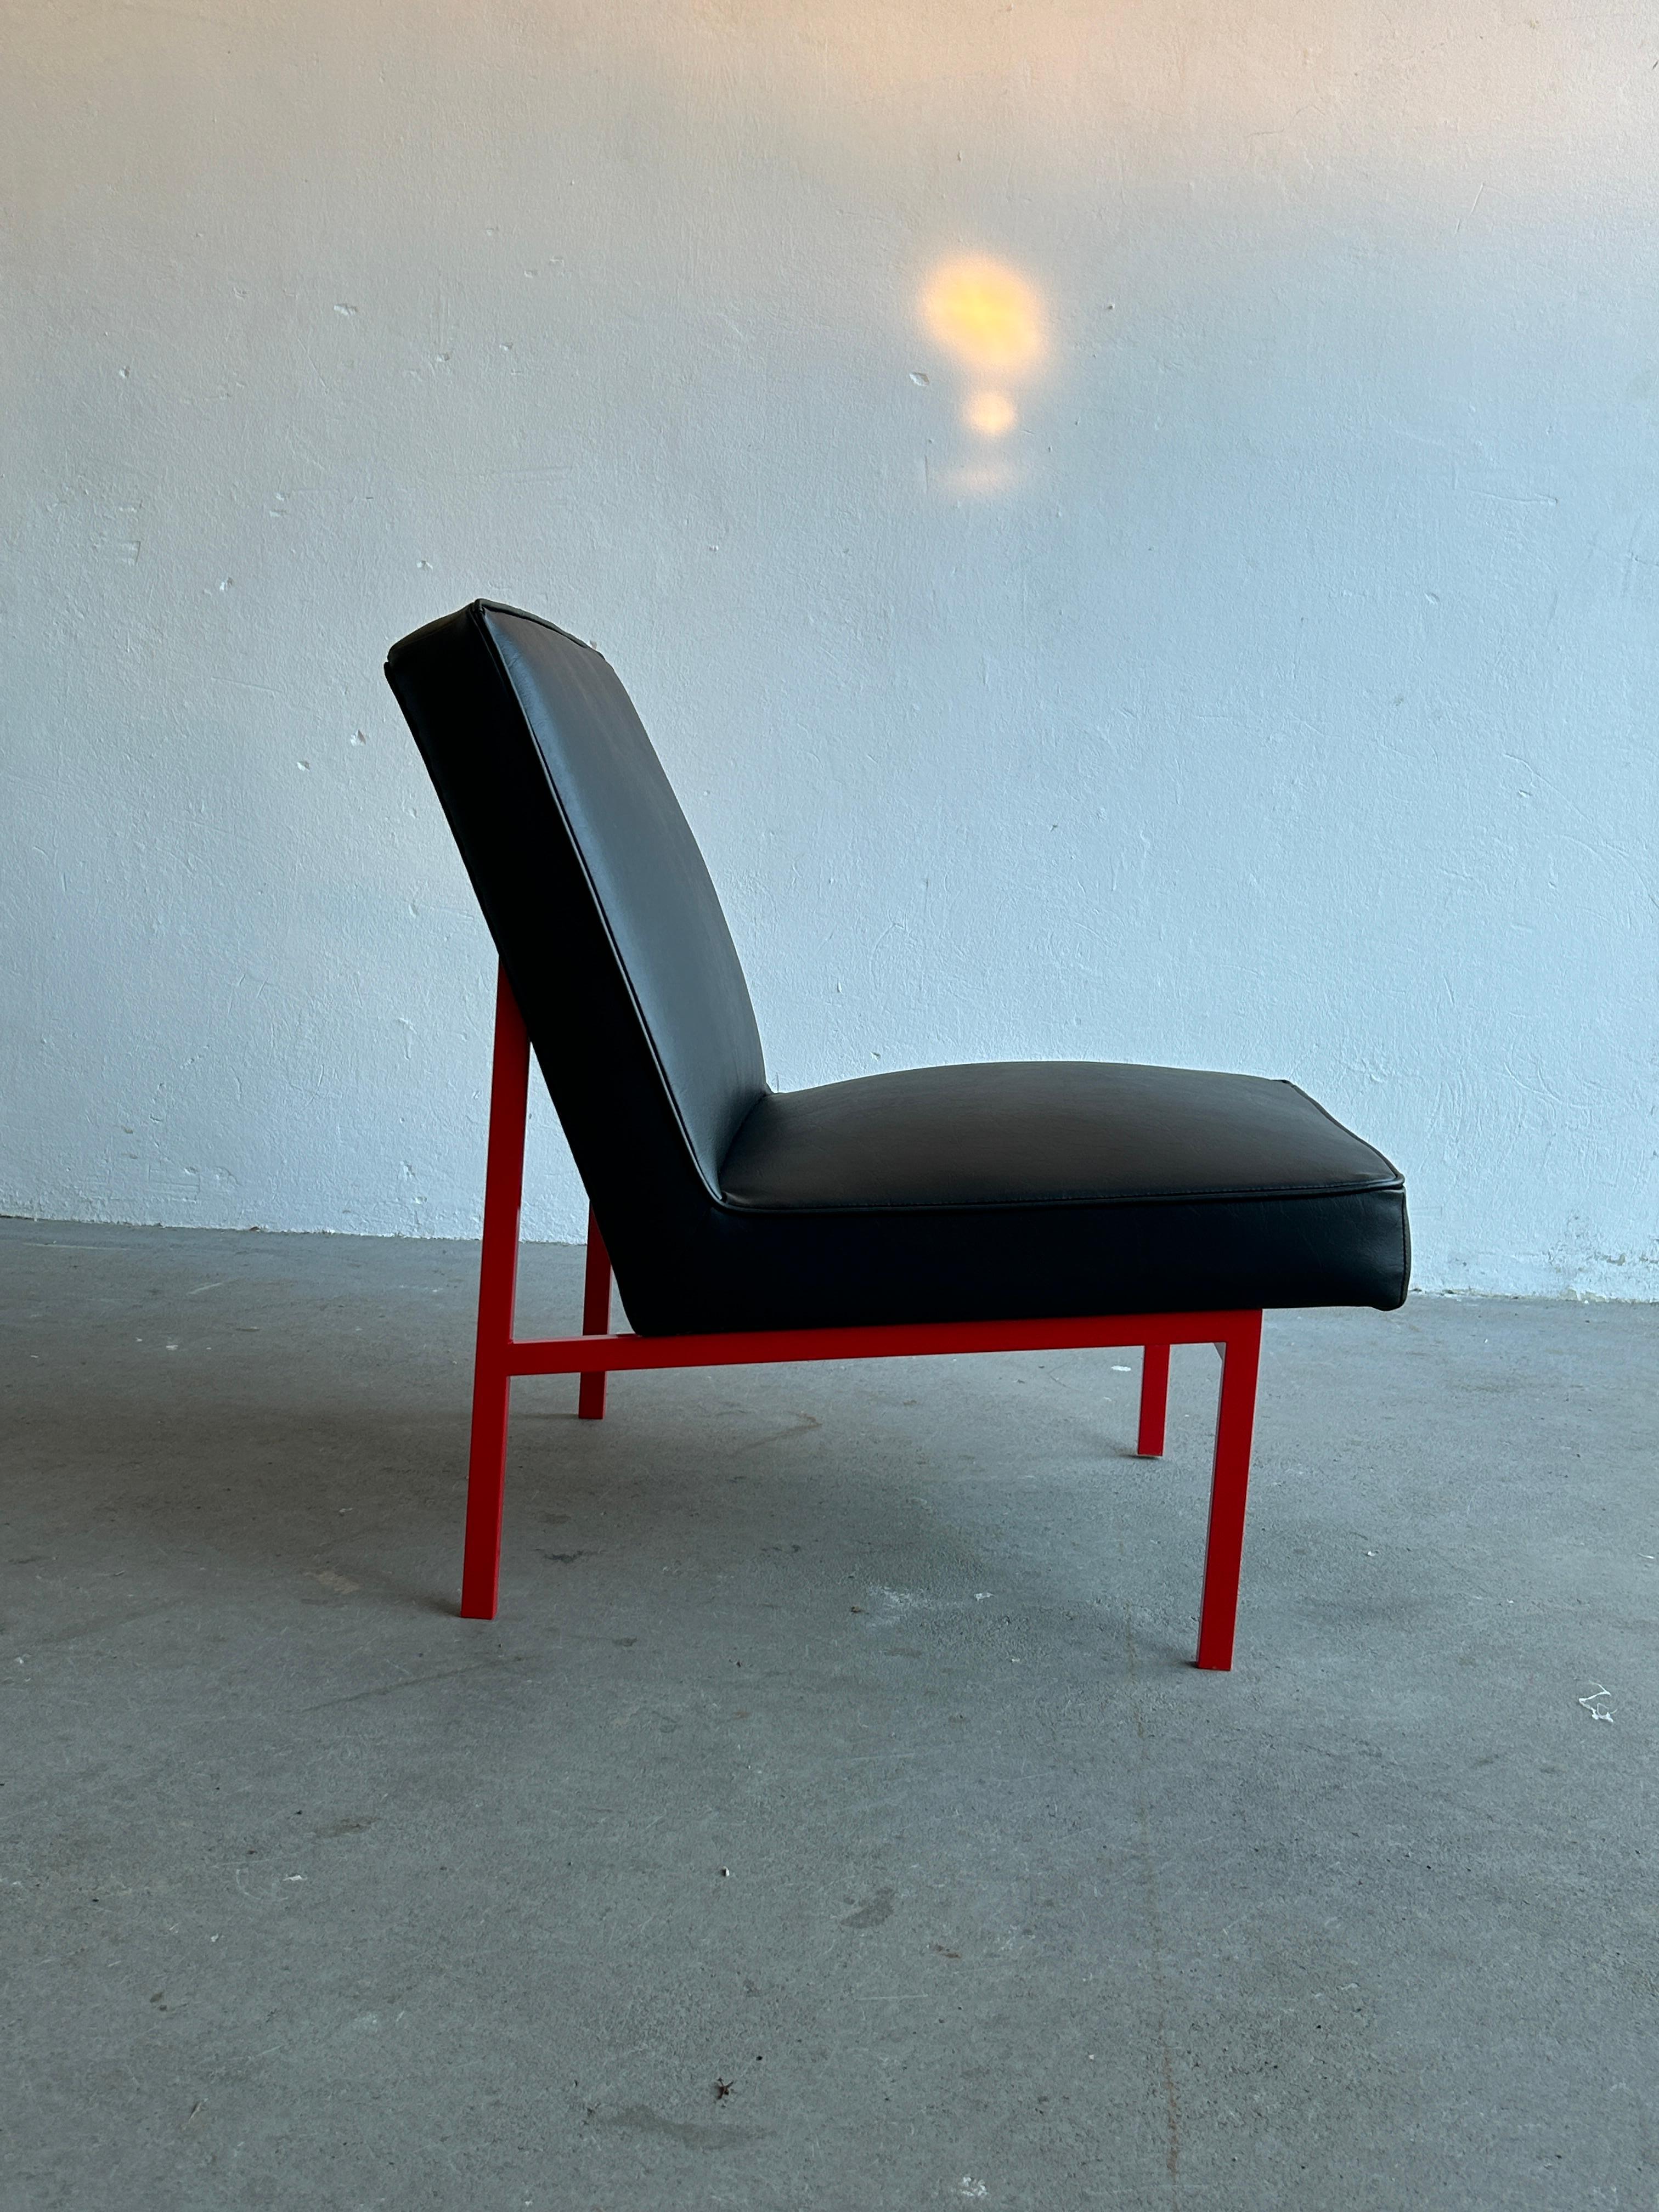 A beautiful vintage Mid-Century-Modern black faux leather and red frame lounge chair. Designed by Niko Kralj and produced by Stol Kamnik, Yugoslavia, during the 1970s. 

Completely restored, repainted in the original red and metal coloring, and